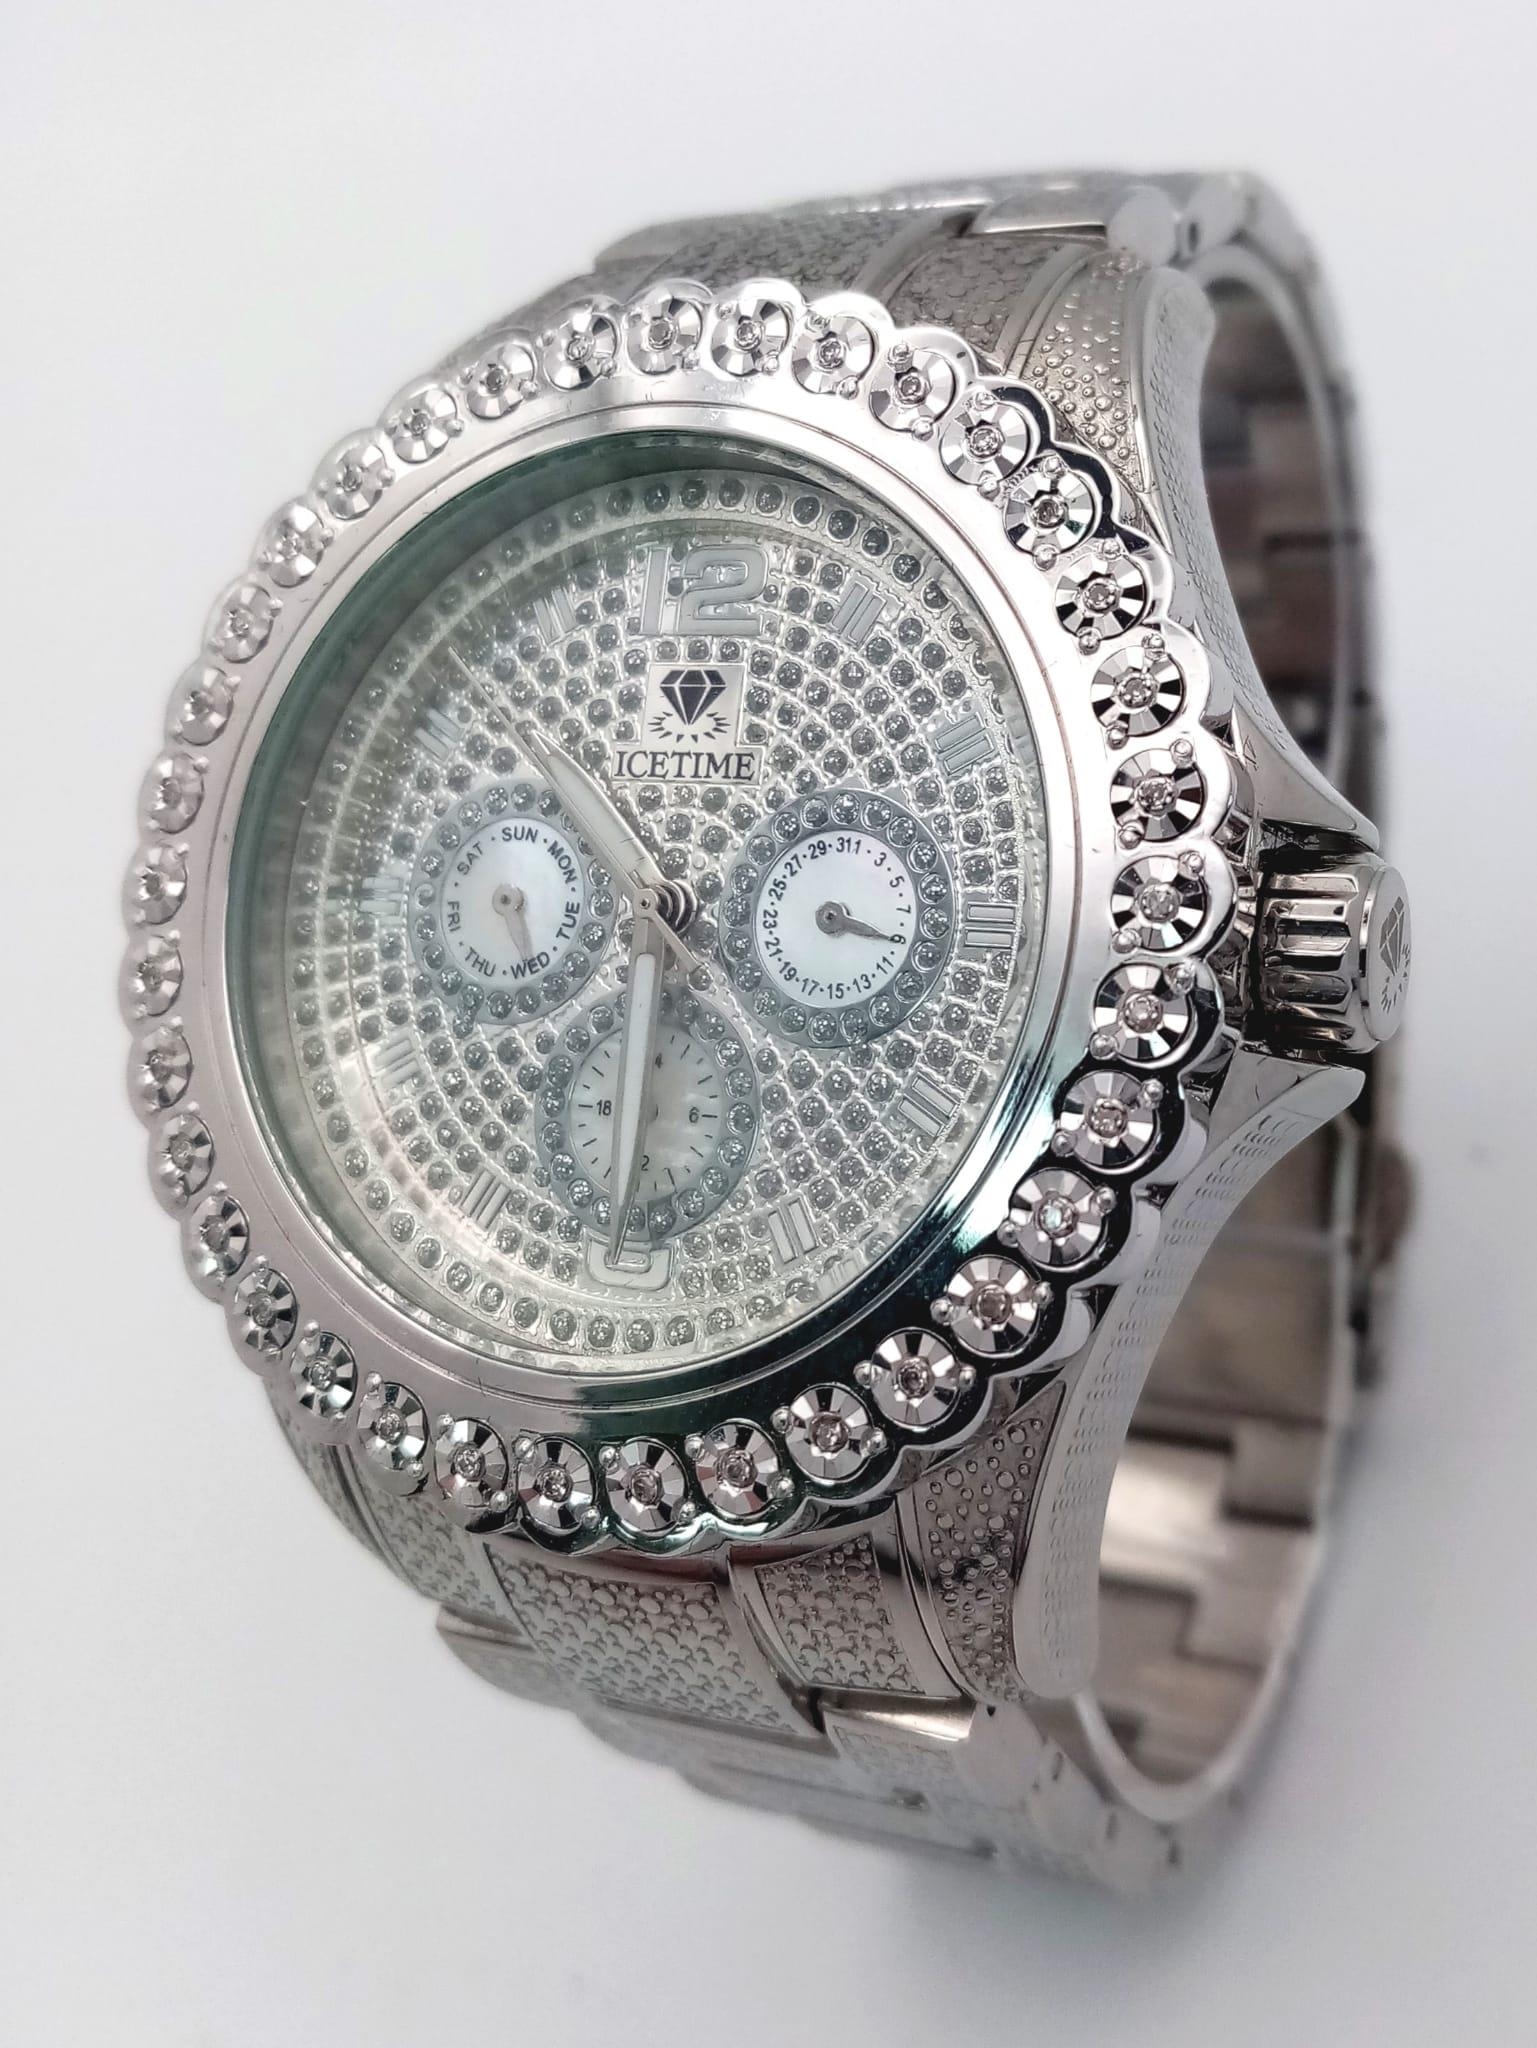 An Icetime Diamond Quartz Gents Watch. Stainless steel bracelet and case - 47mm. White stone - Image 2 of 8